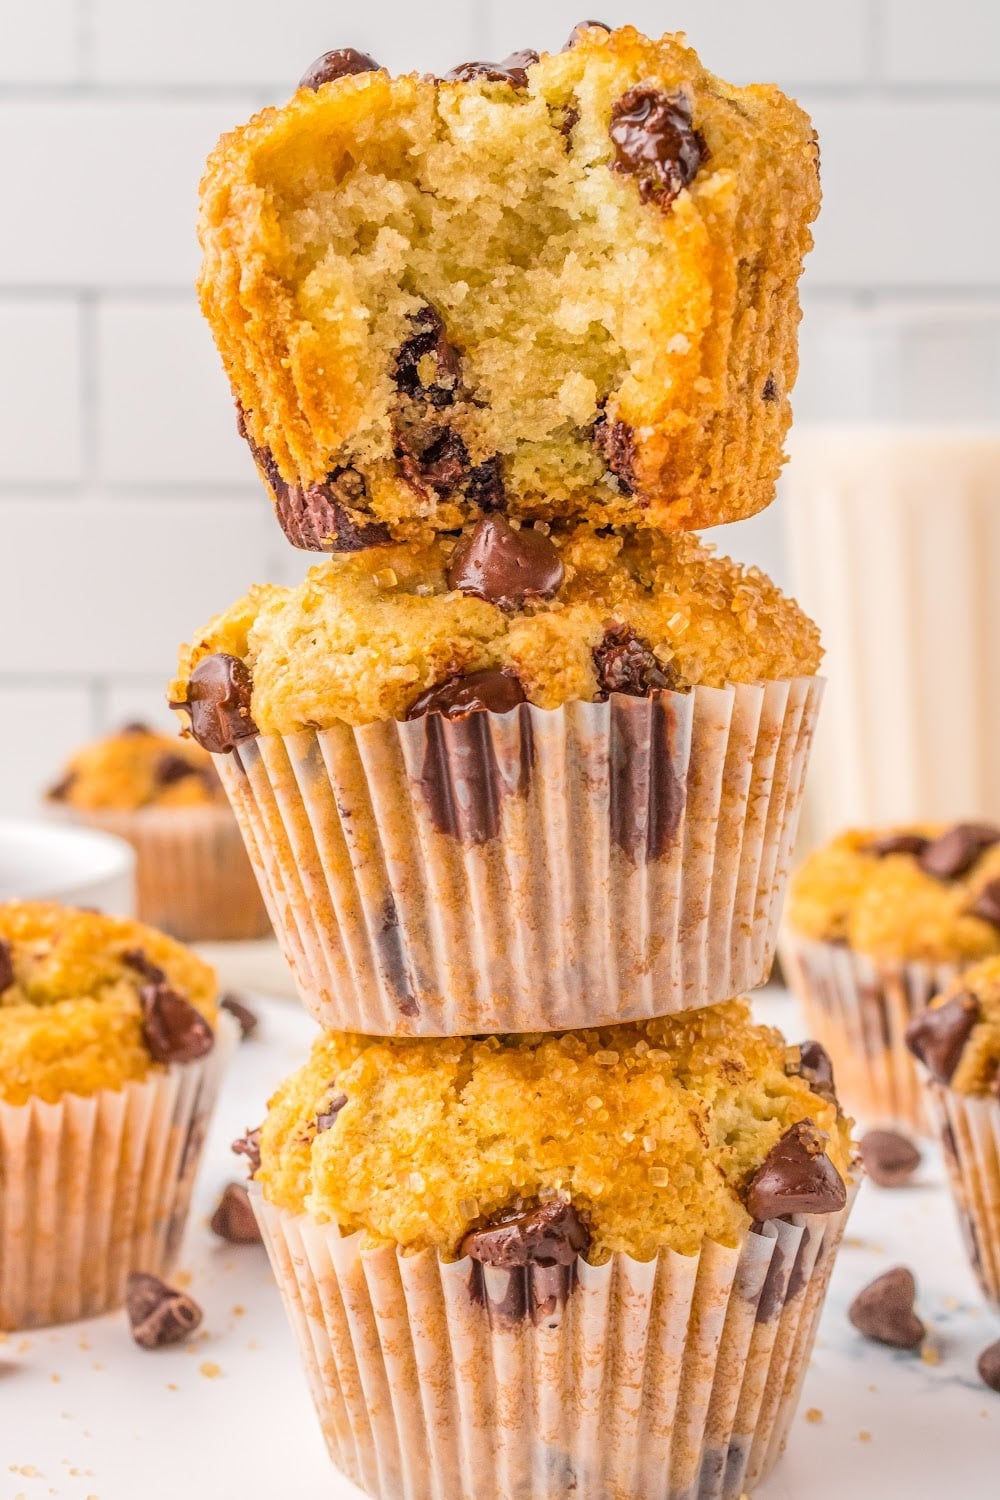 Three muffins stacked together.